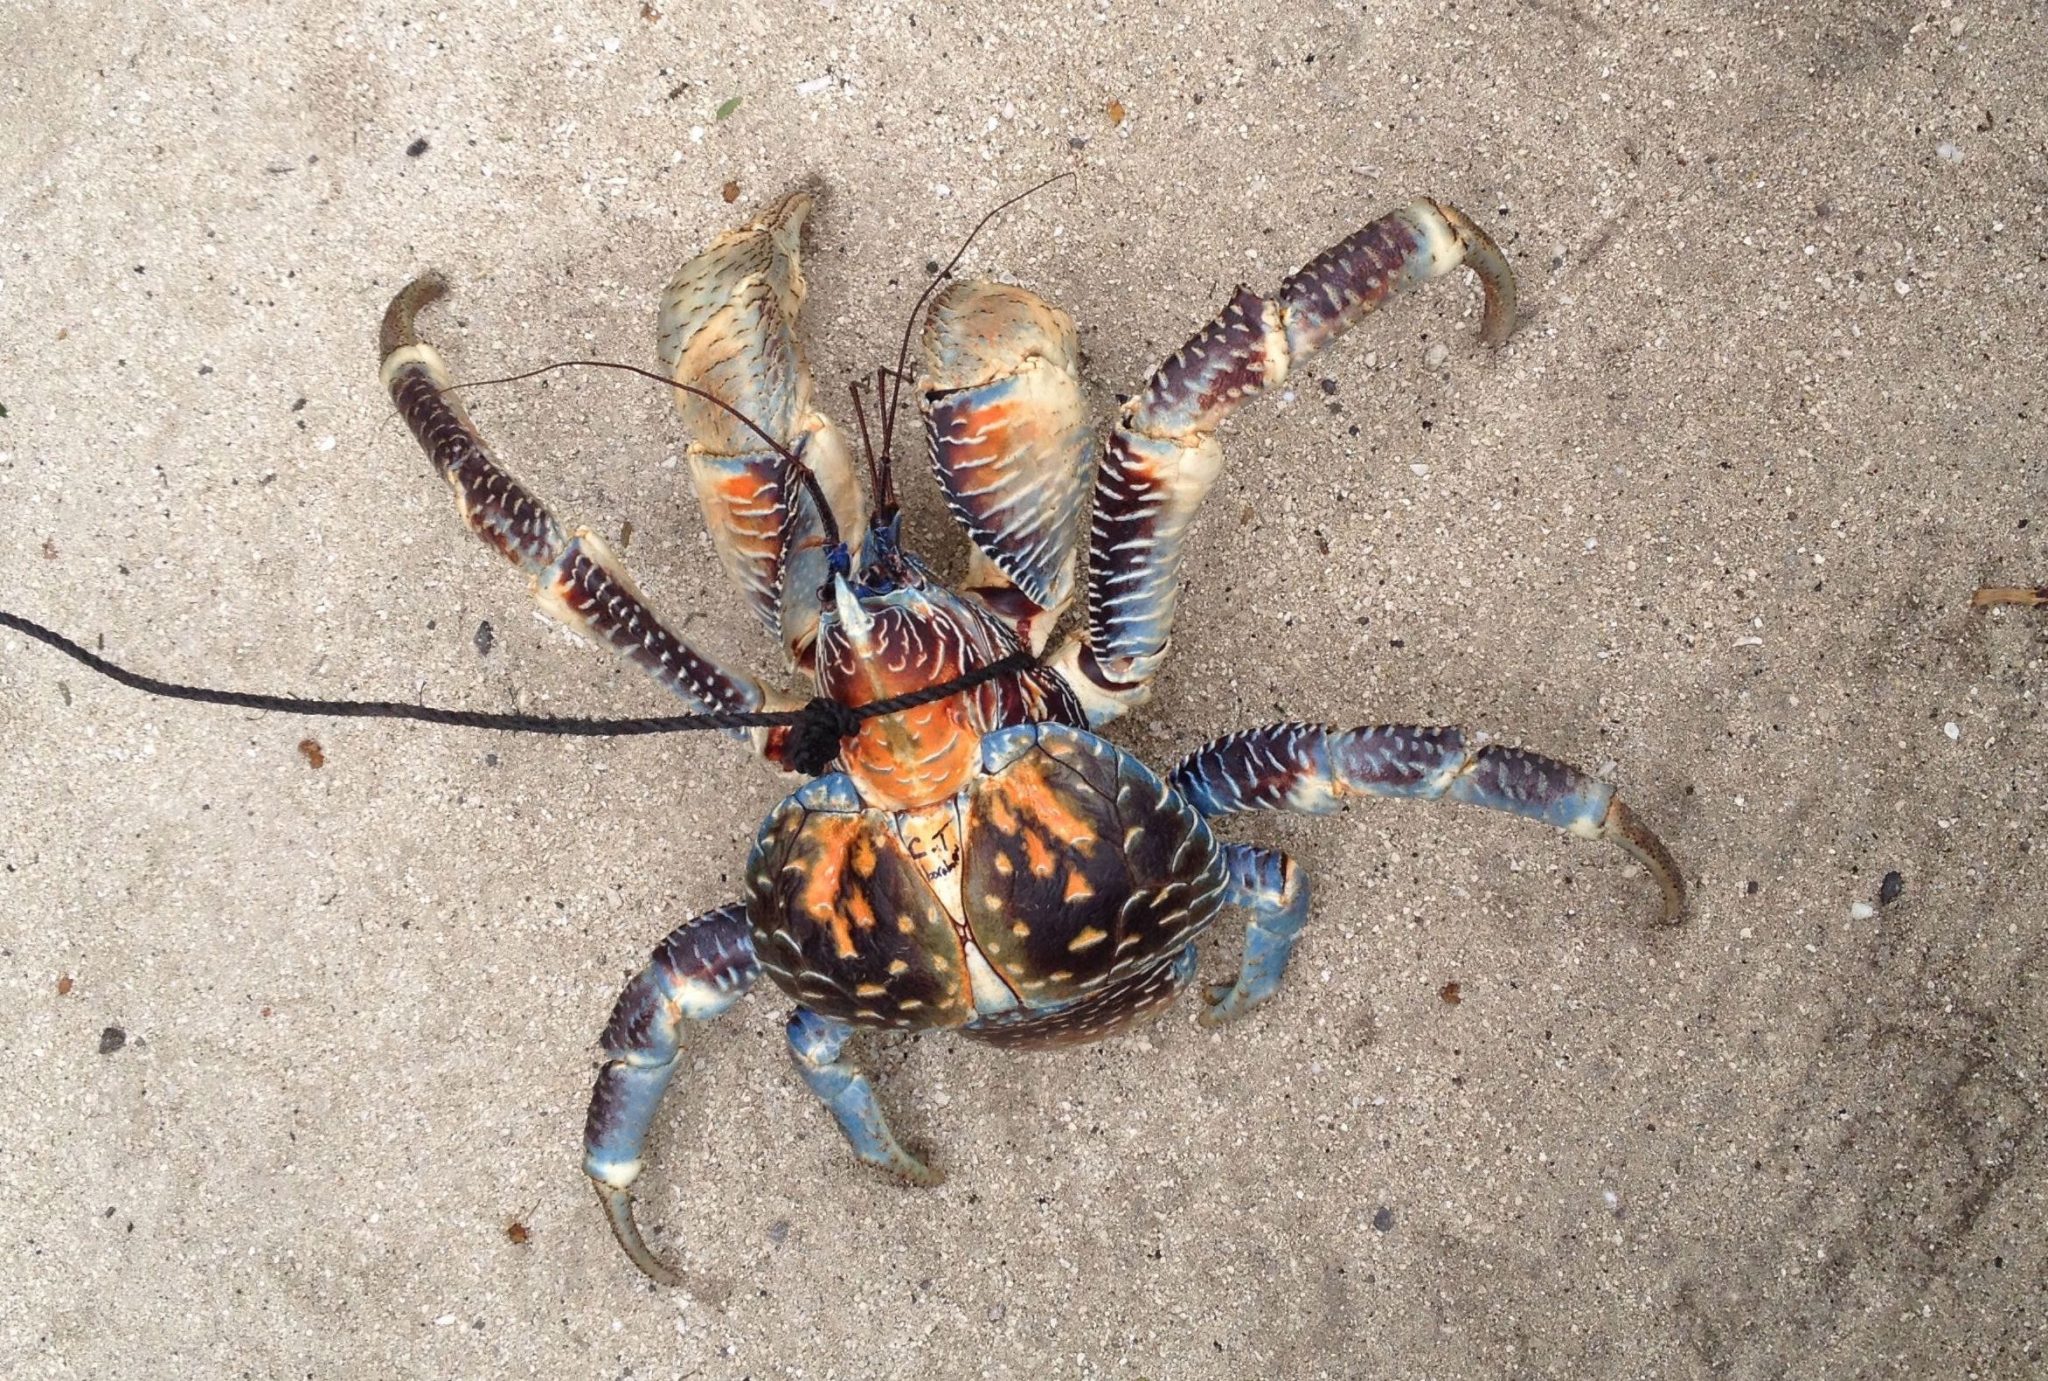 28. The 15 year old pet coconut crab had his name written on his back, C.T. Bora Bora. They enjoy eating coconuts!